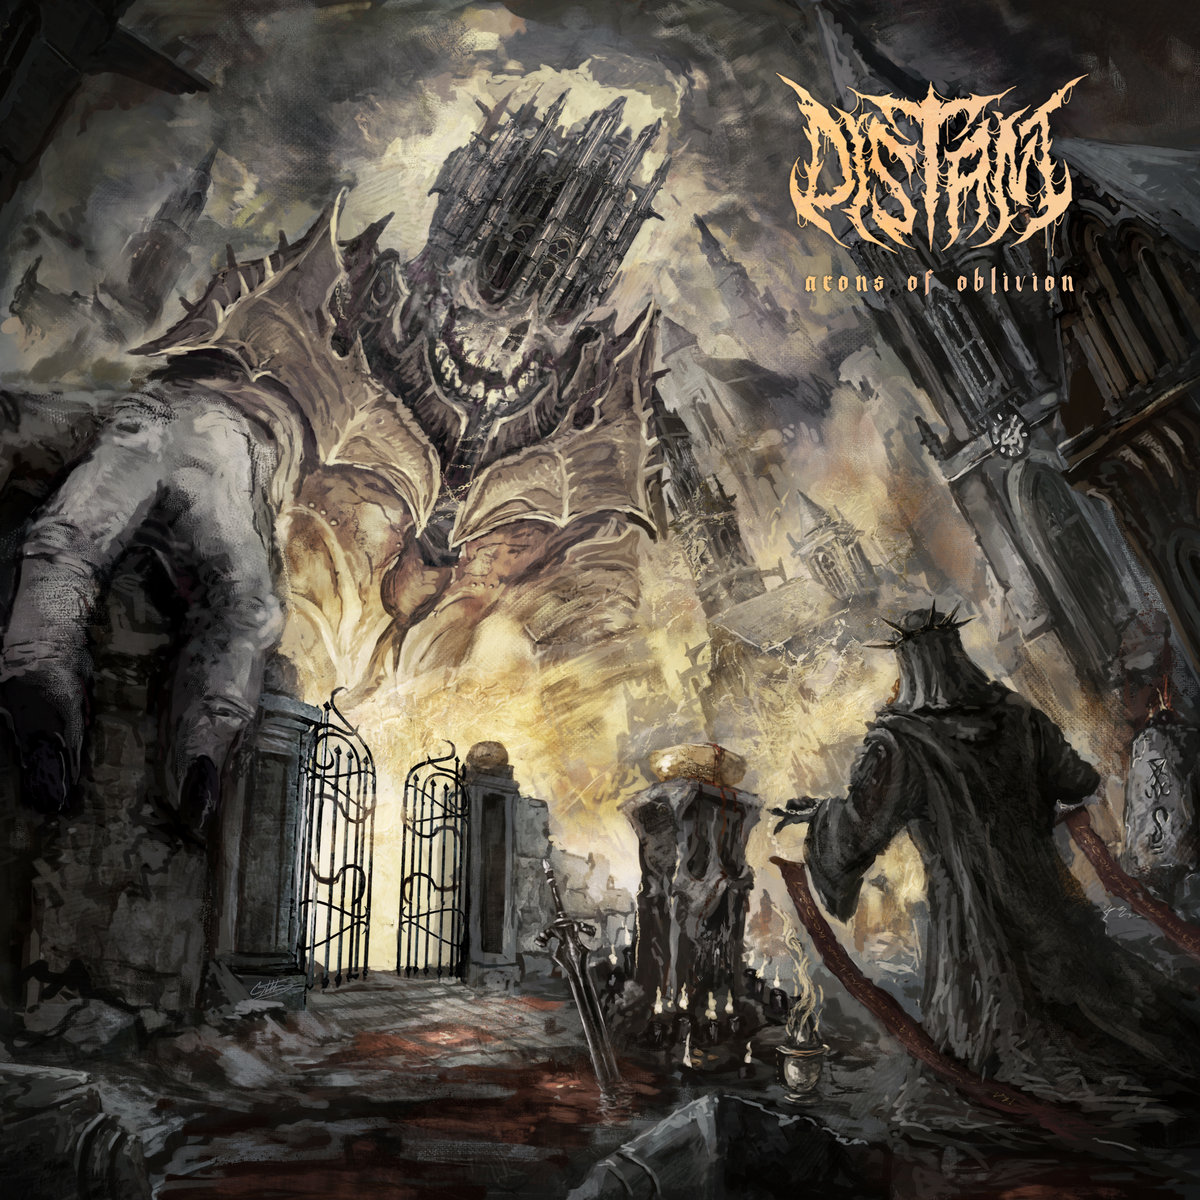 Today we celebrate the belated anniversary of one one 2021's heaviest releases, @DistantNL's 'Aeons Of Oblivion'. For those of you who own a copy on vinyl - what variant do you have? Show us yours in the comments!